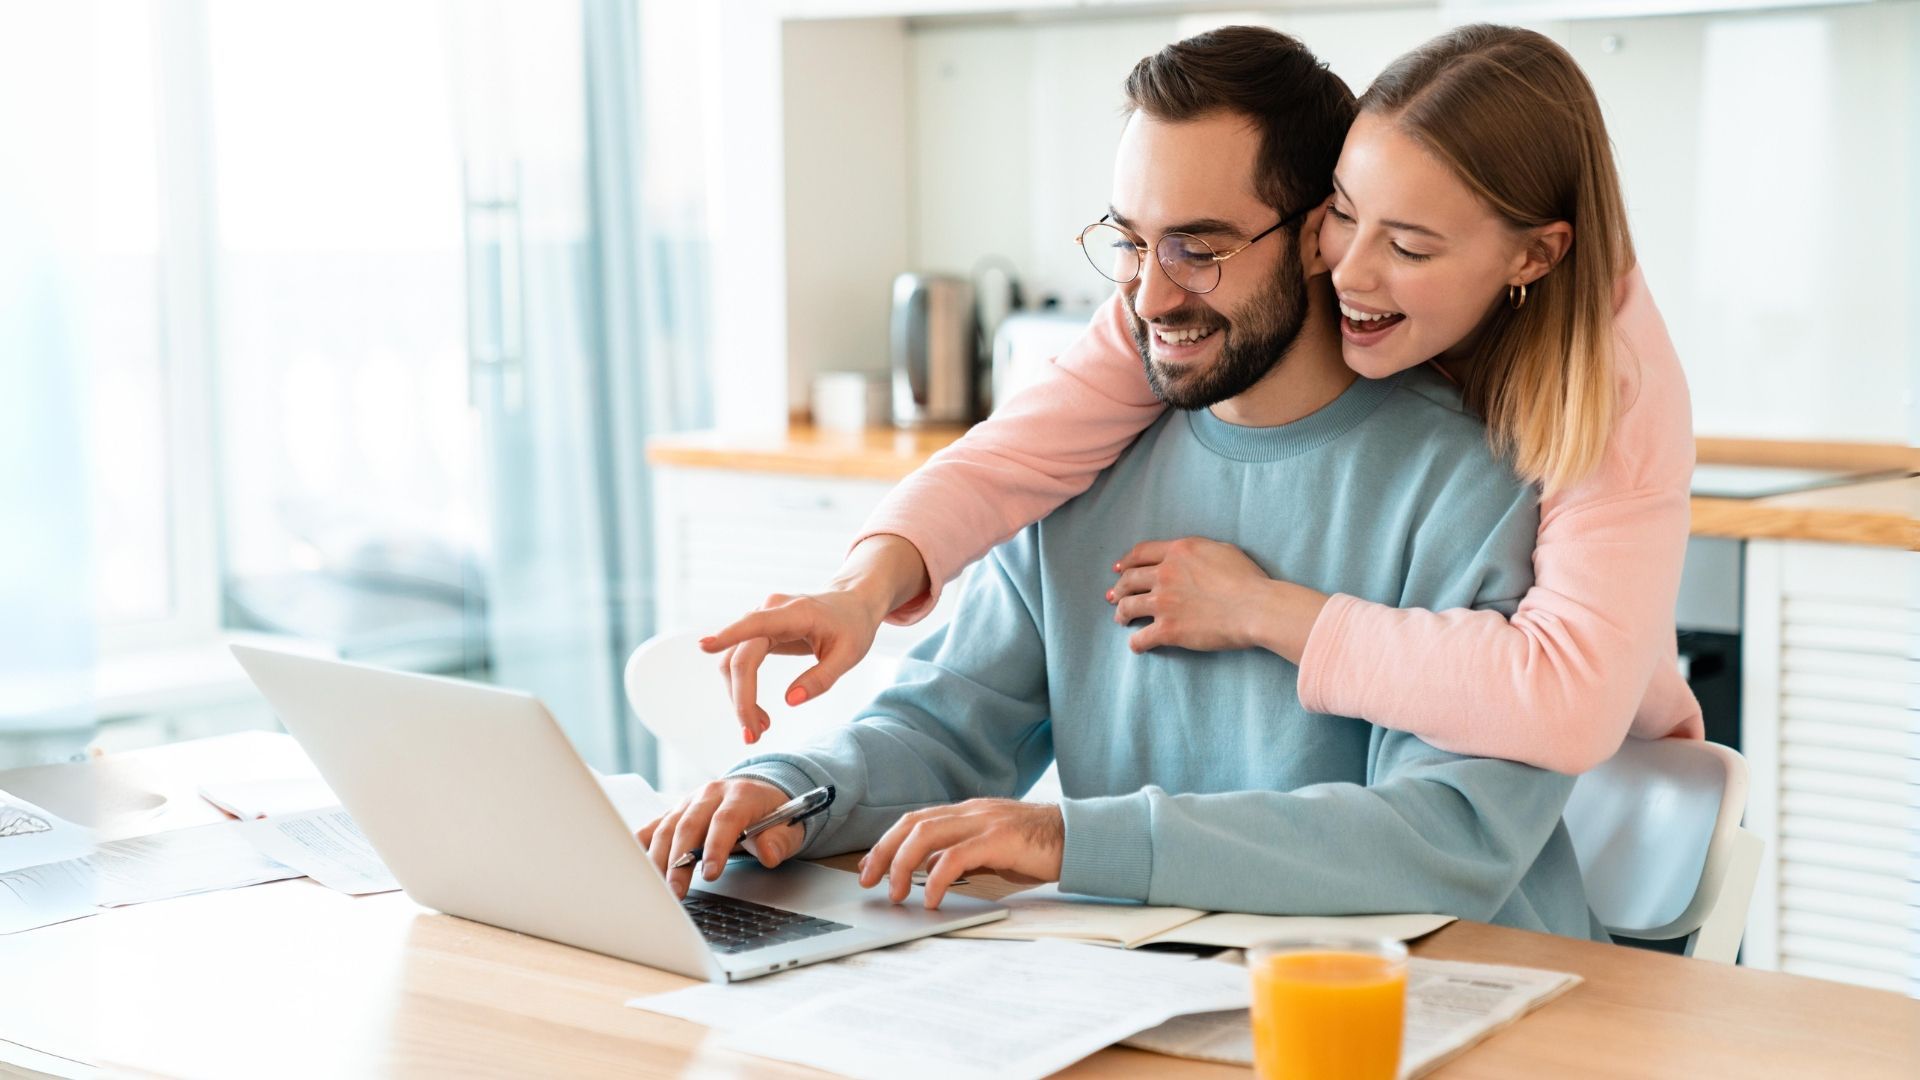 A happy couple looking at an email marketing campaign in their kitchen over breakfast